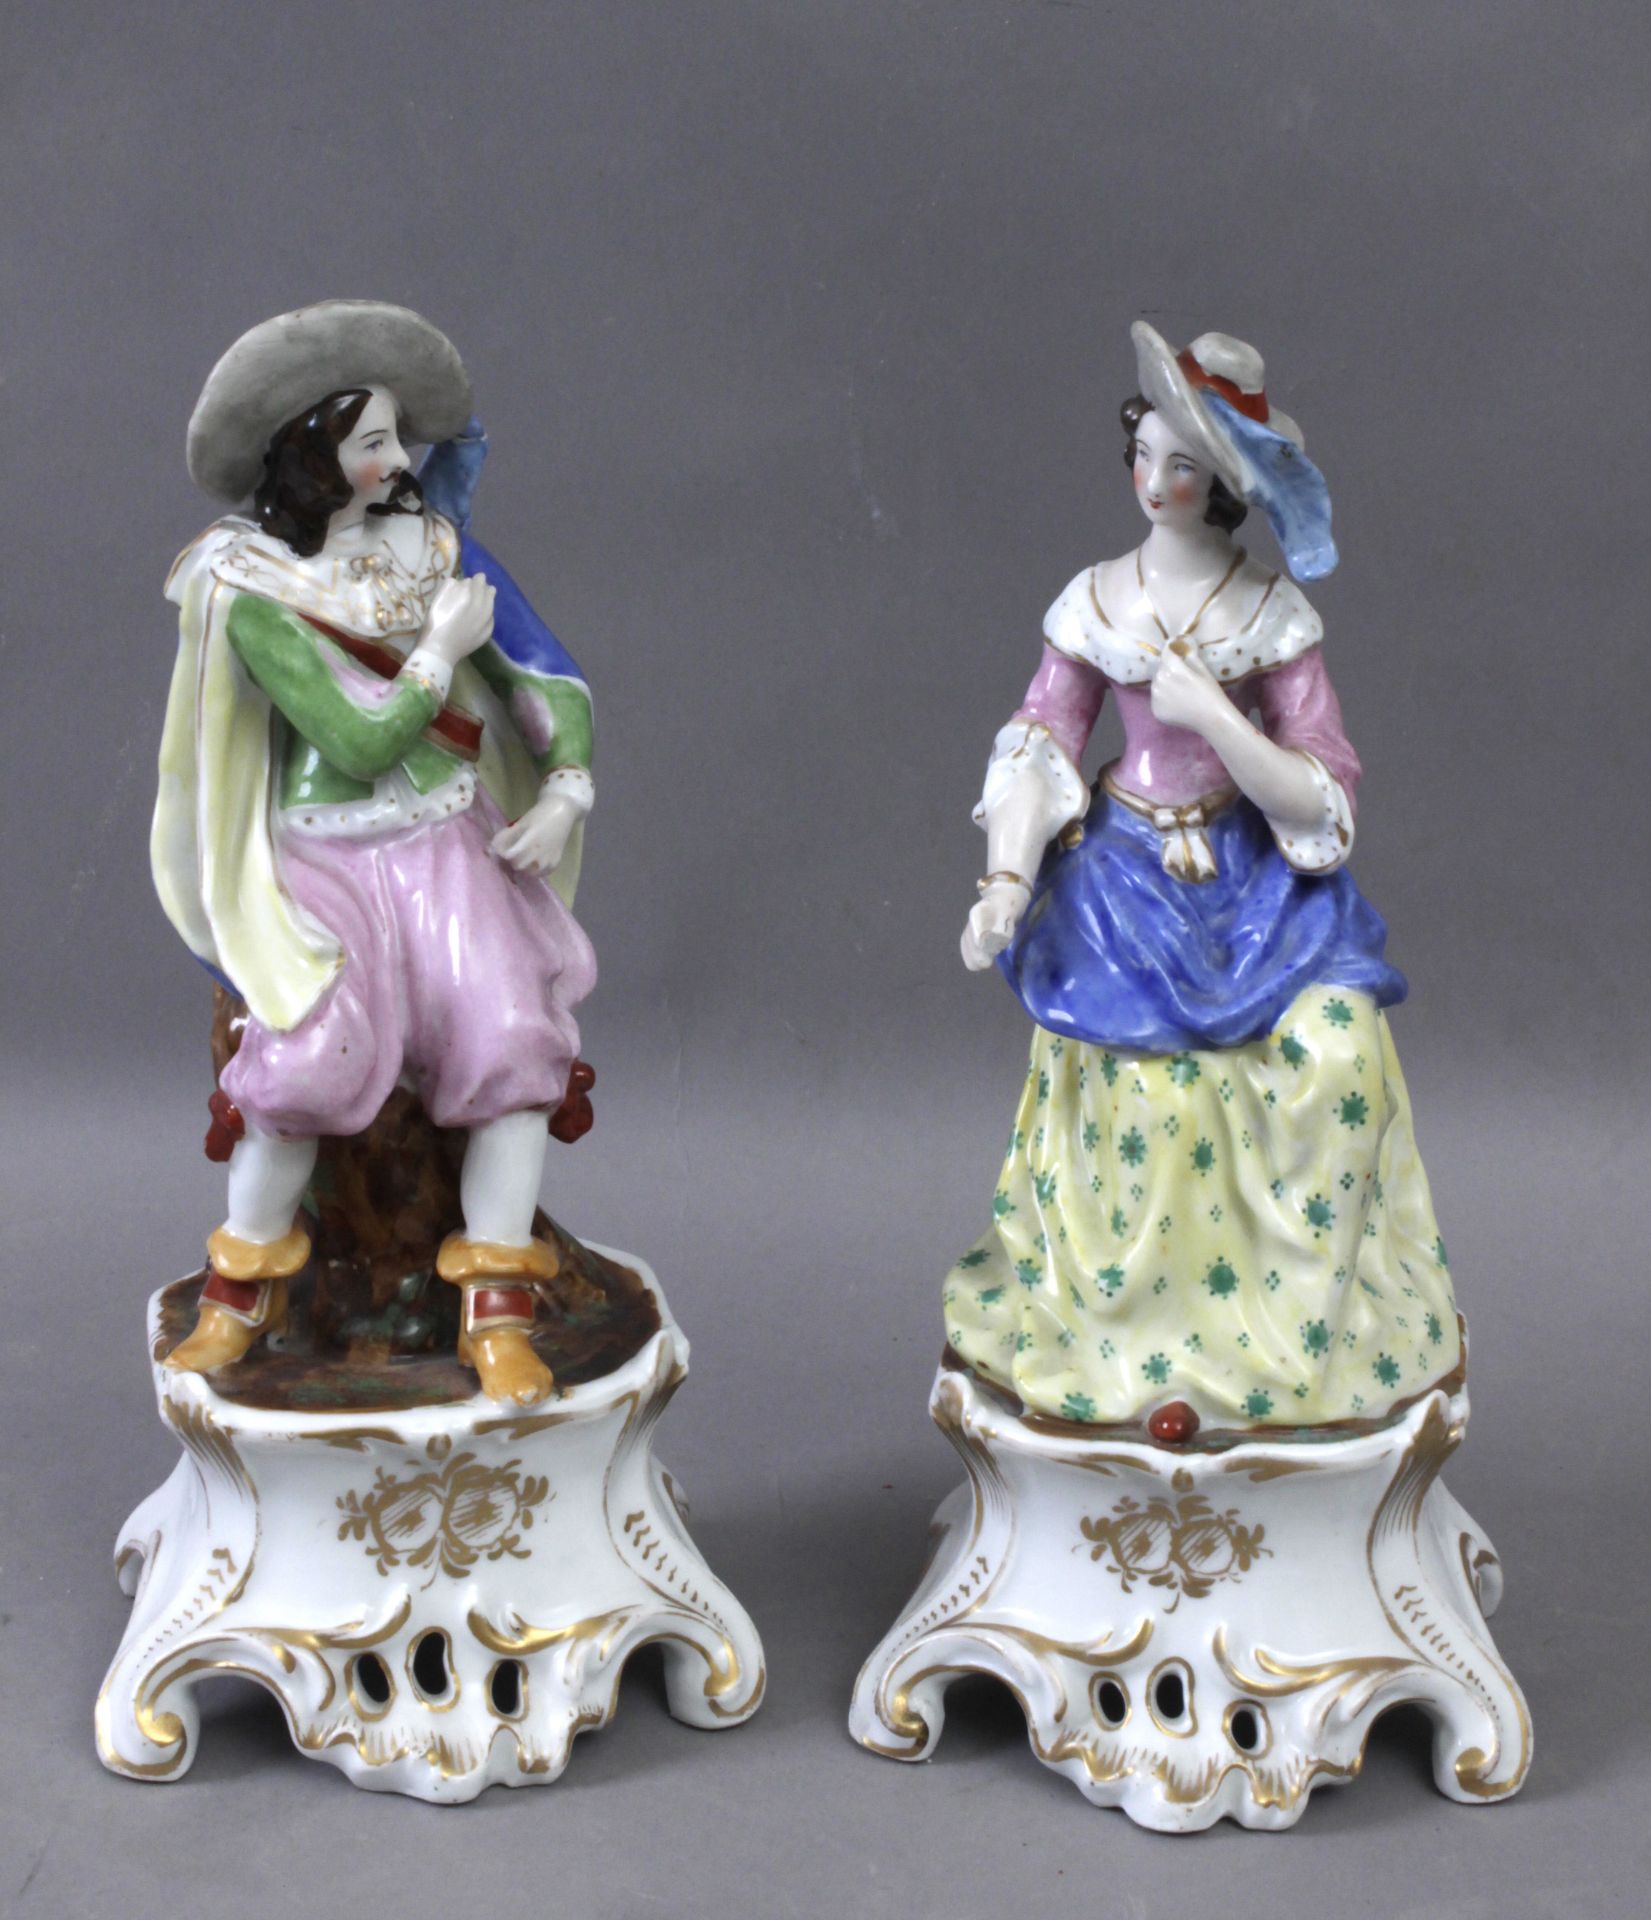 A pair of 19th century figurines in Old Paris porcelain - Image 3 of 3